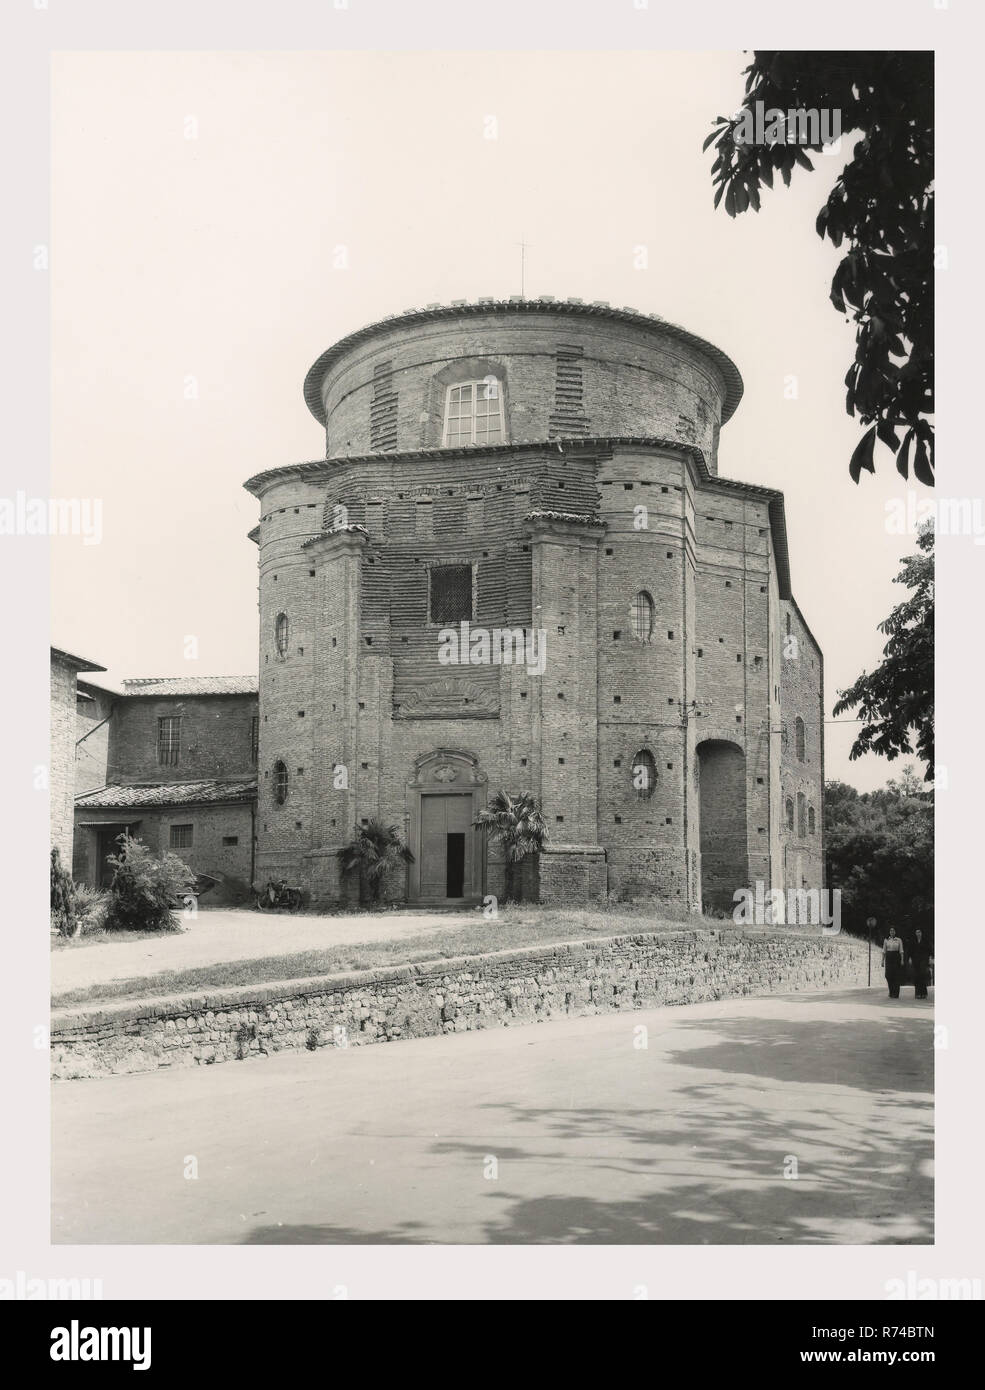 Umbria Perugia Citta della Pieve S. Lucia, this is my Italy, the italian country of visual history, Views of details of the 17th century painting and architectural decoration in addition, details of a 14th century fresco cycle. Stock Photo